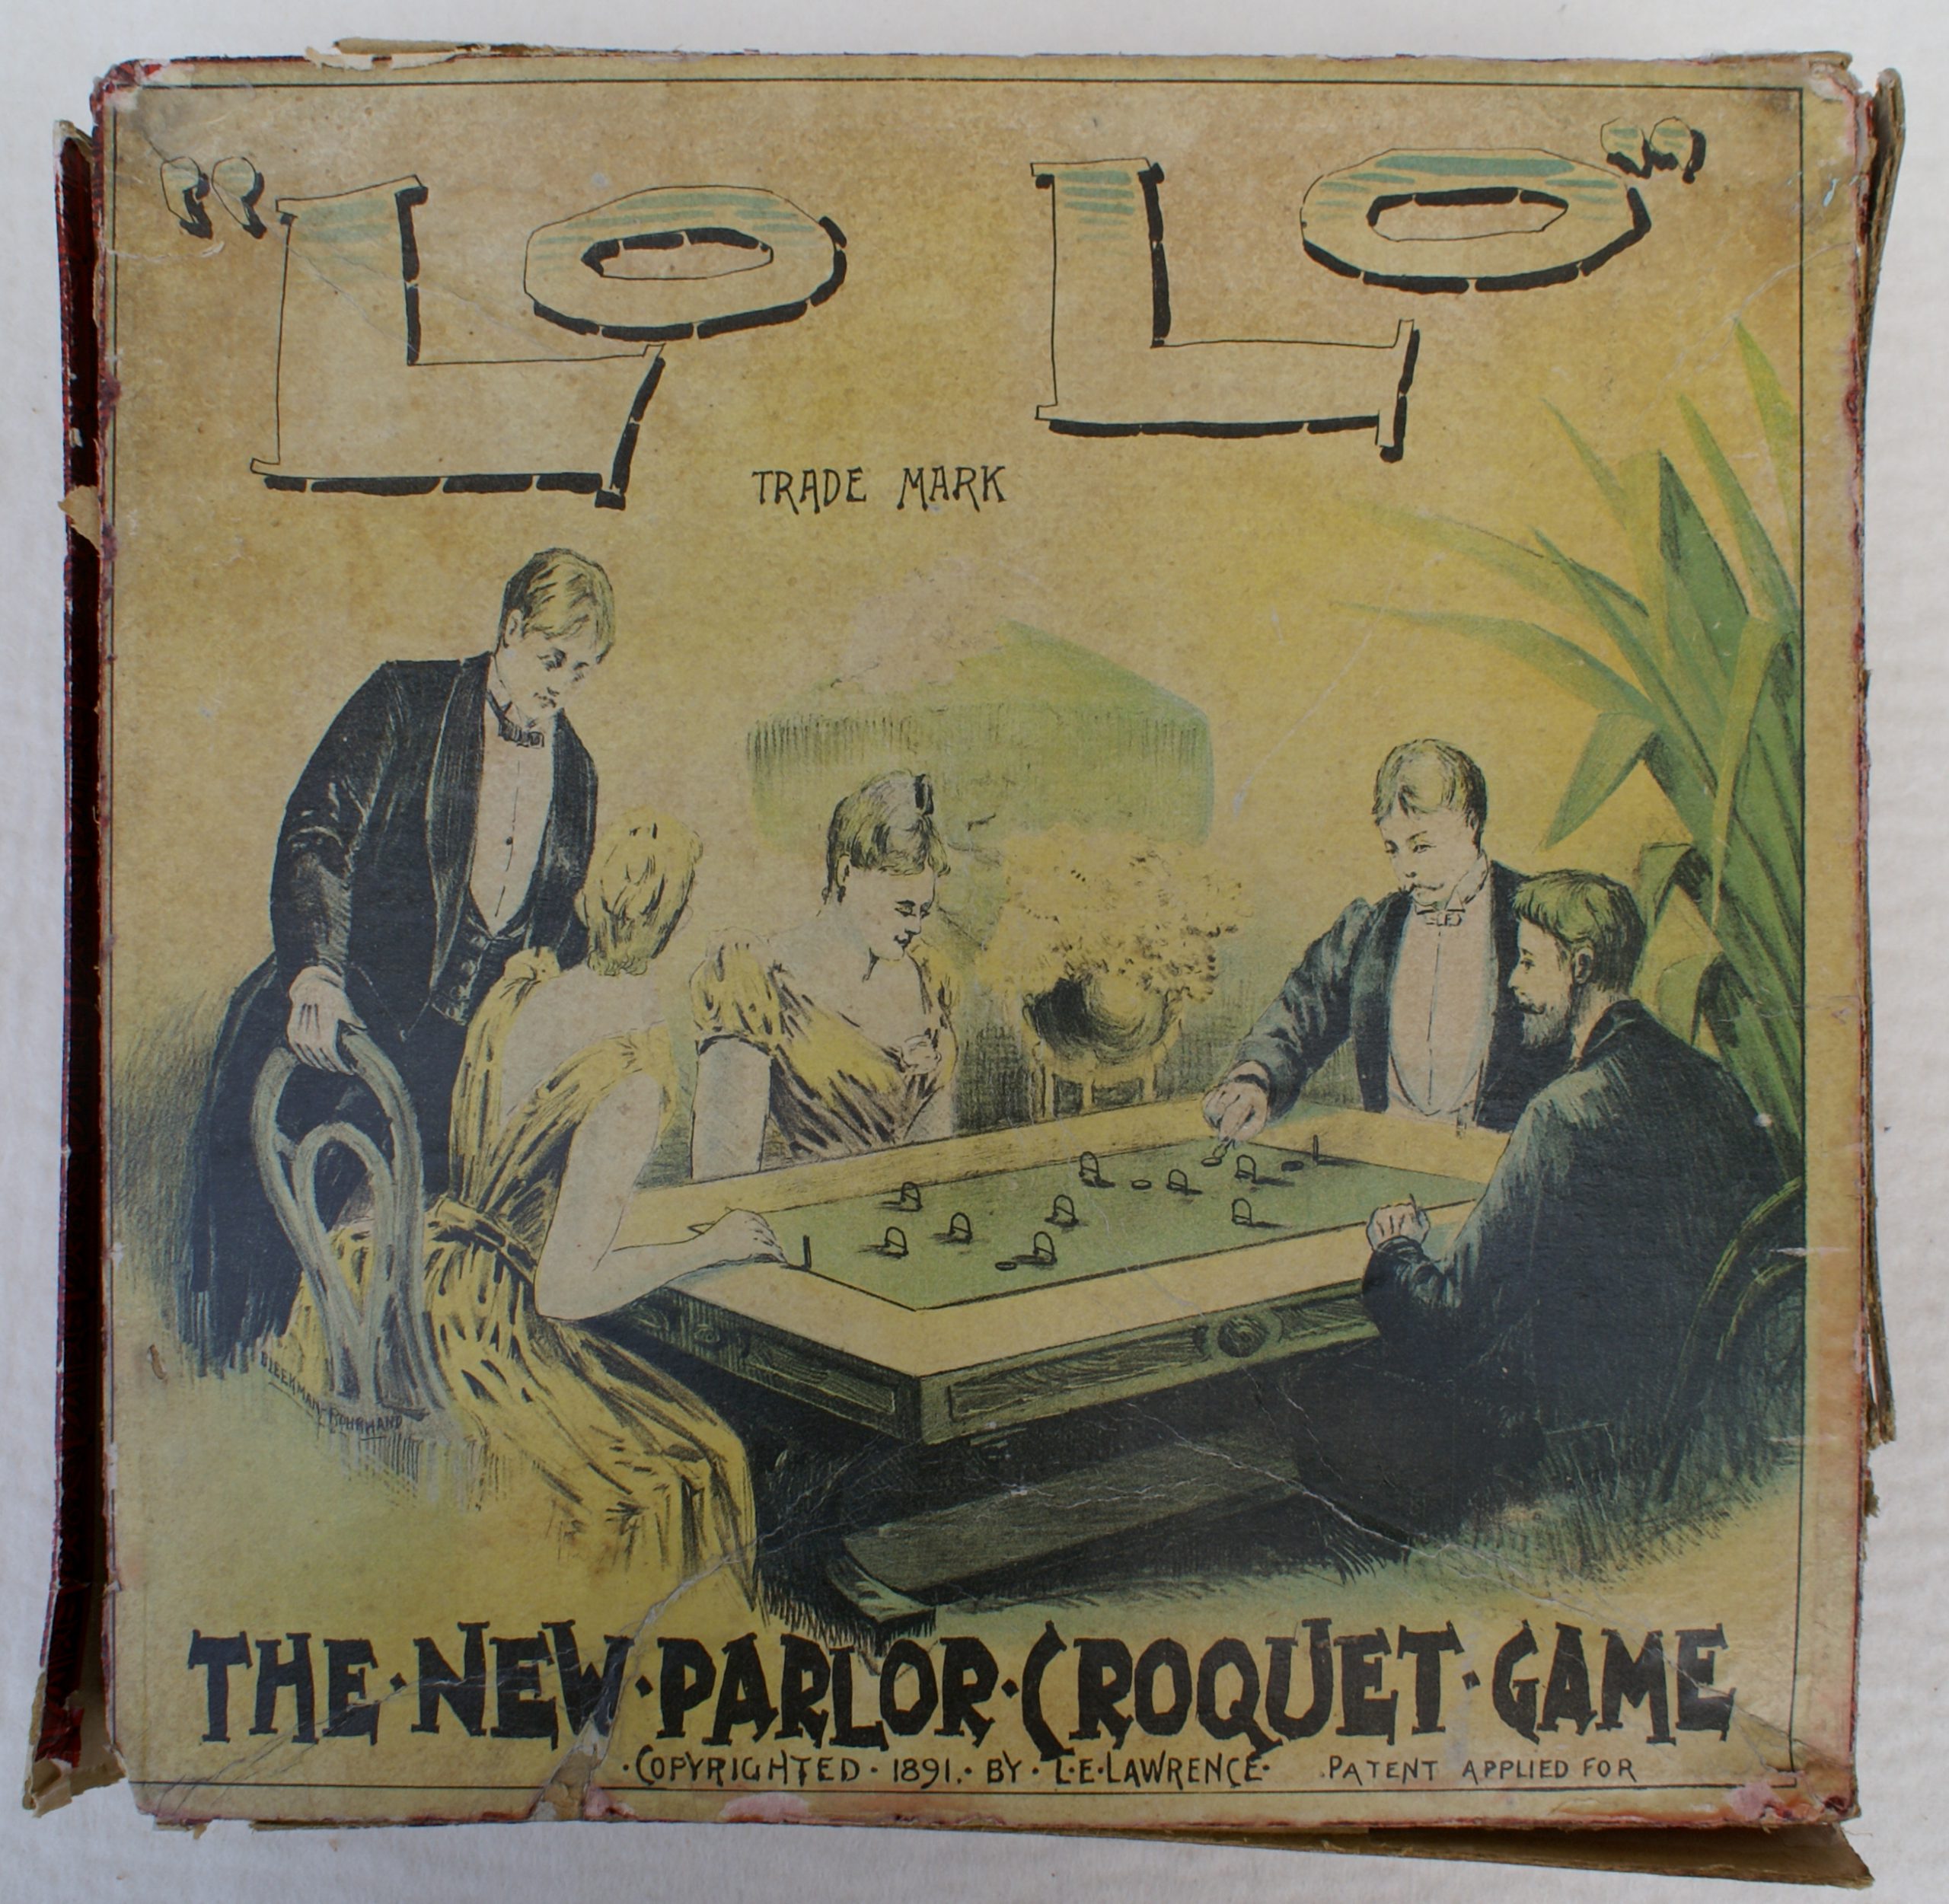 Tucker Tw ID • HOR-02 — AGPI ID • G-29861 — publisher • E. I. Horsman — title • "LO LO" THE NEW PARLOR CROQUET GAME — notes • "LO LO" THE NEW PARLOUR CROQUET GAME